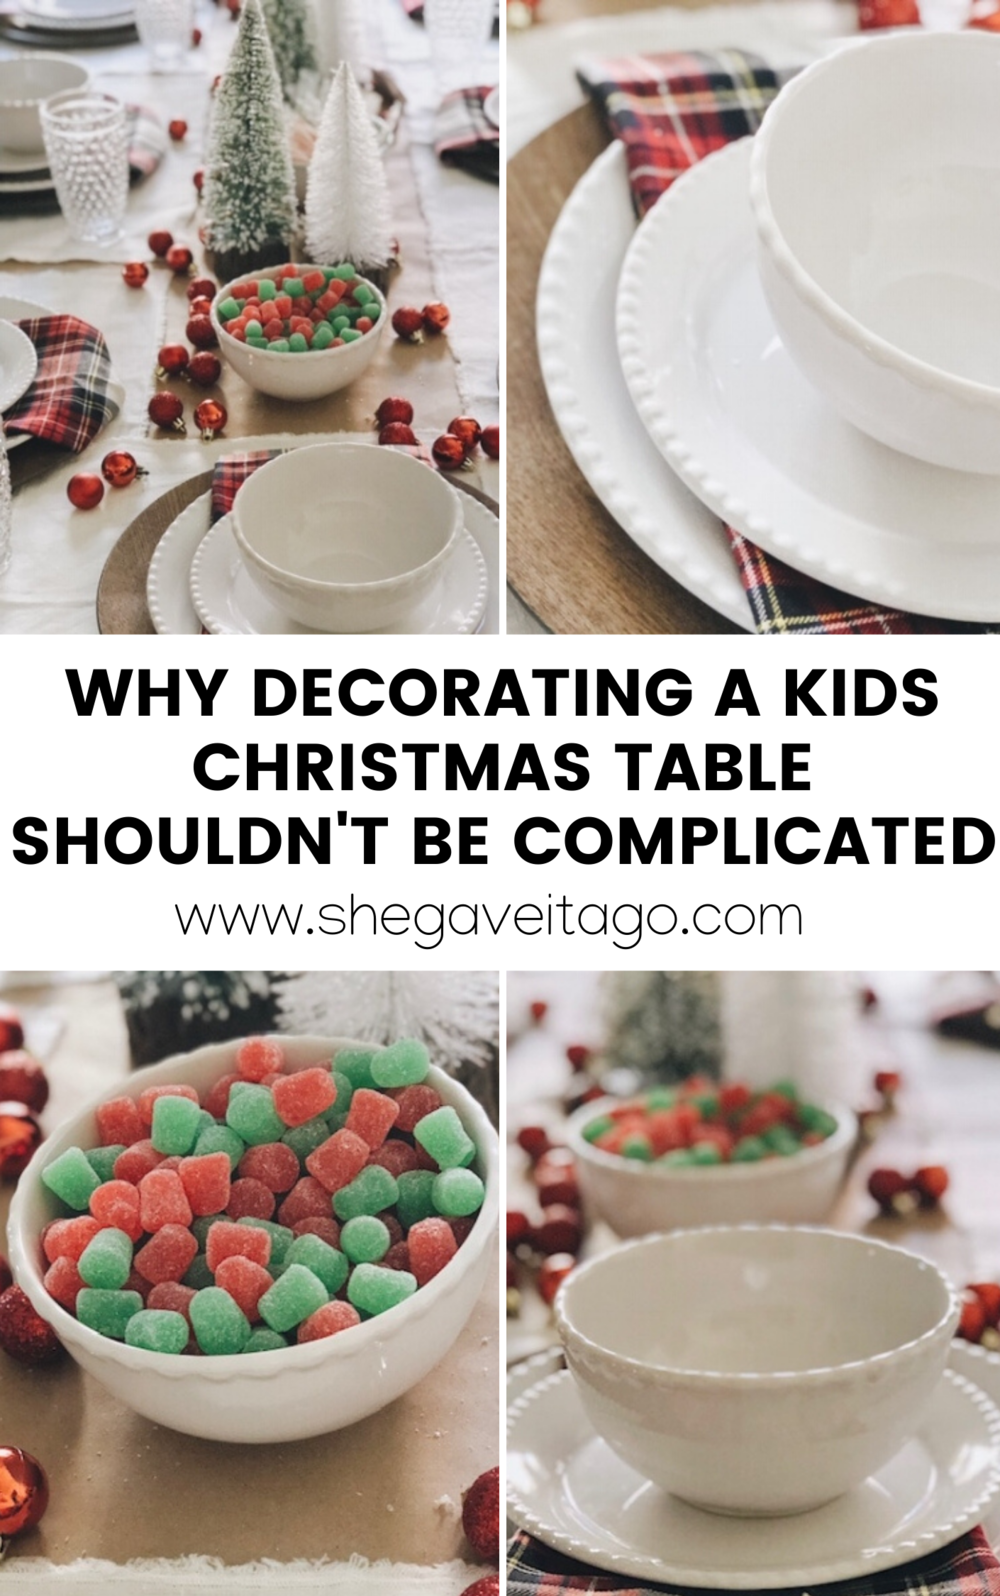 Why Decorating A Kids Christmas Table Shouldn't Be Complicated.png